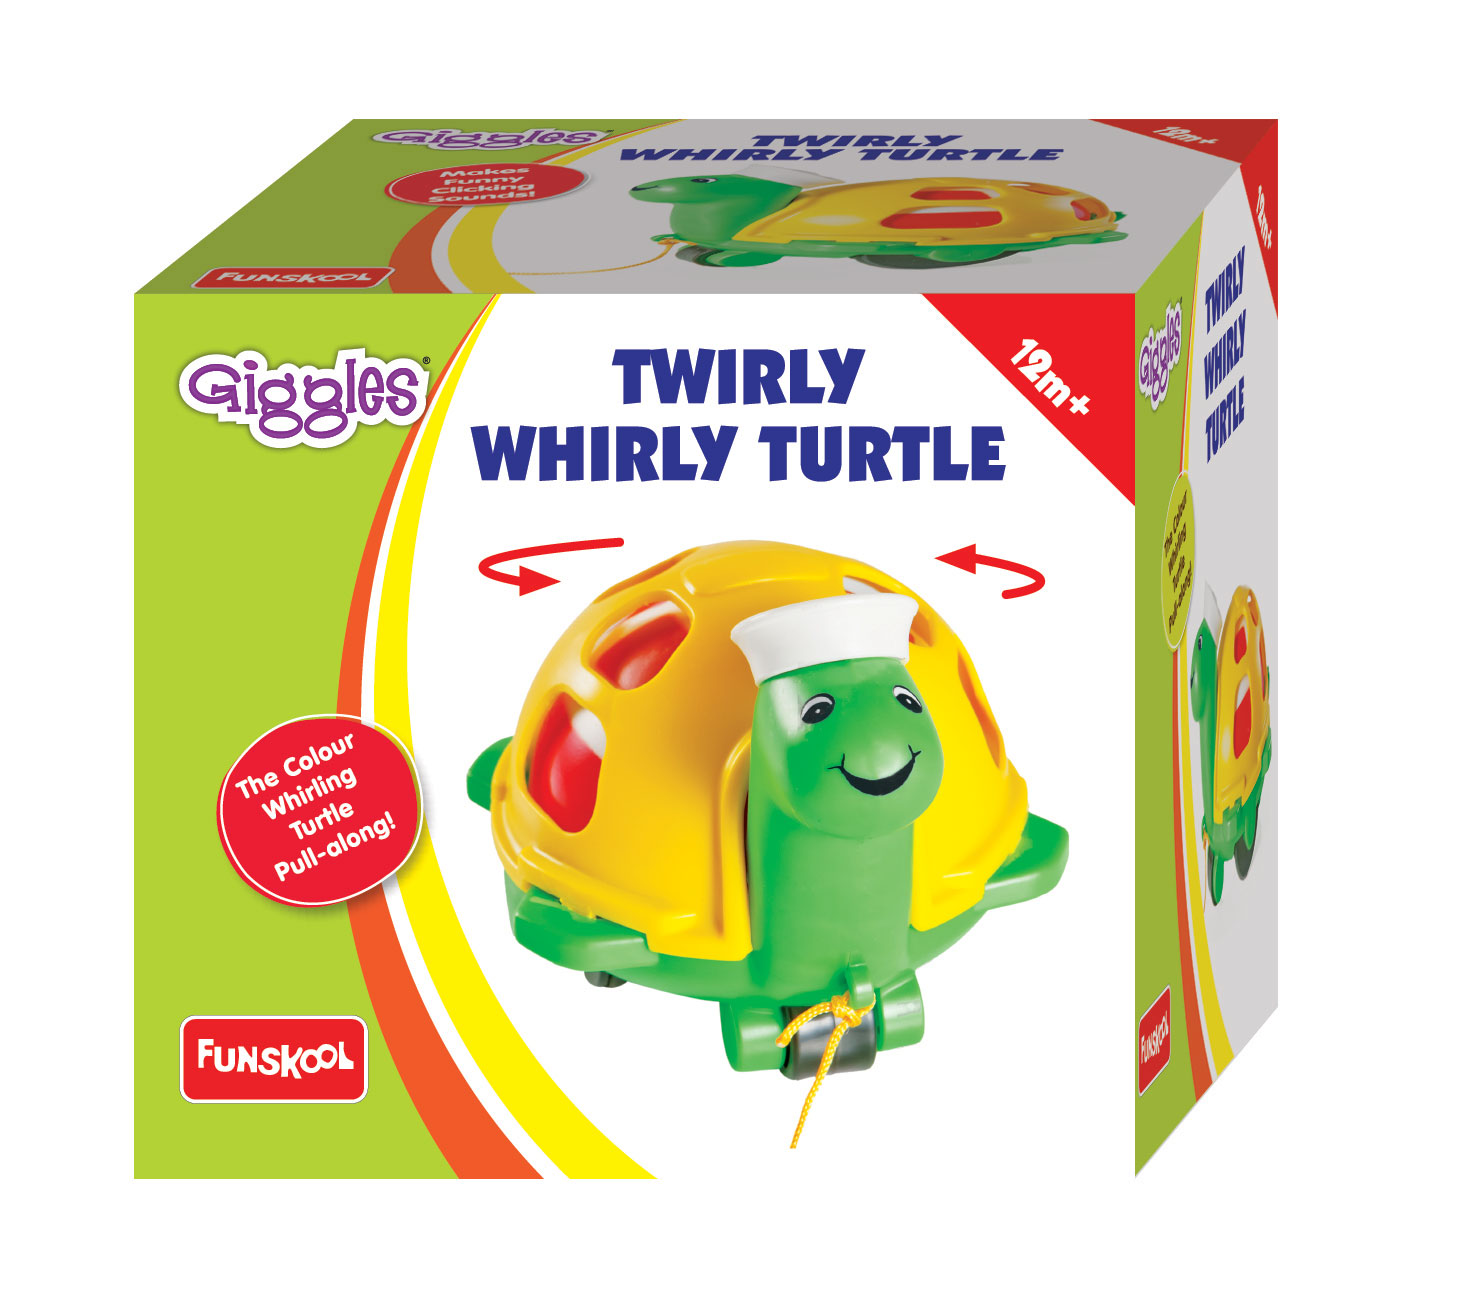 Twirlly Whirlly Turtle